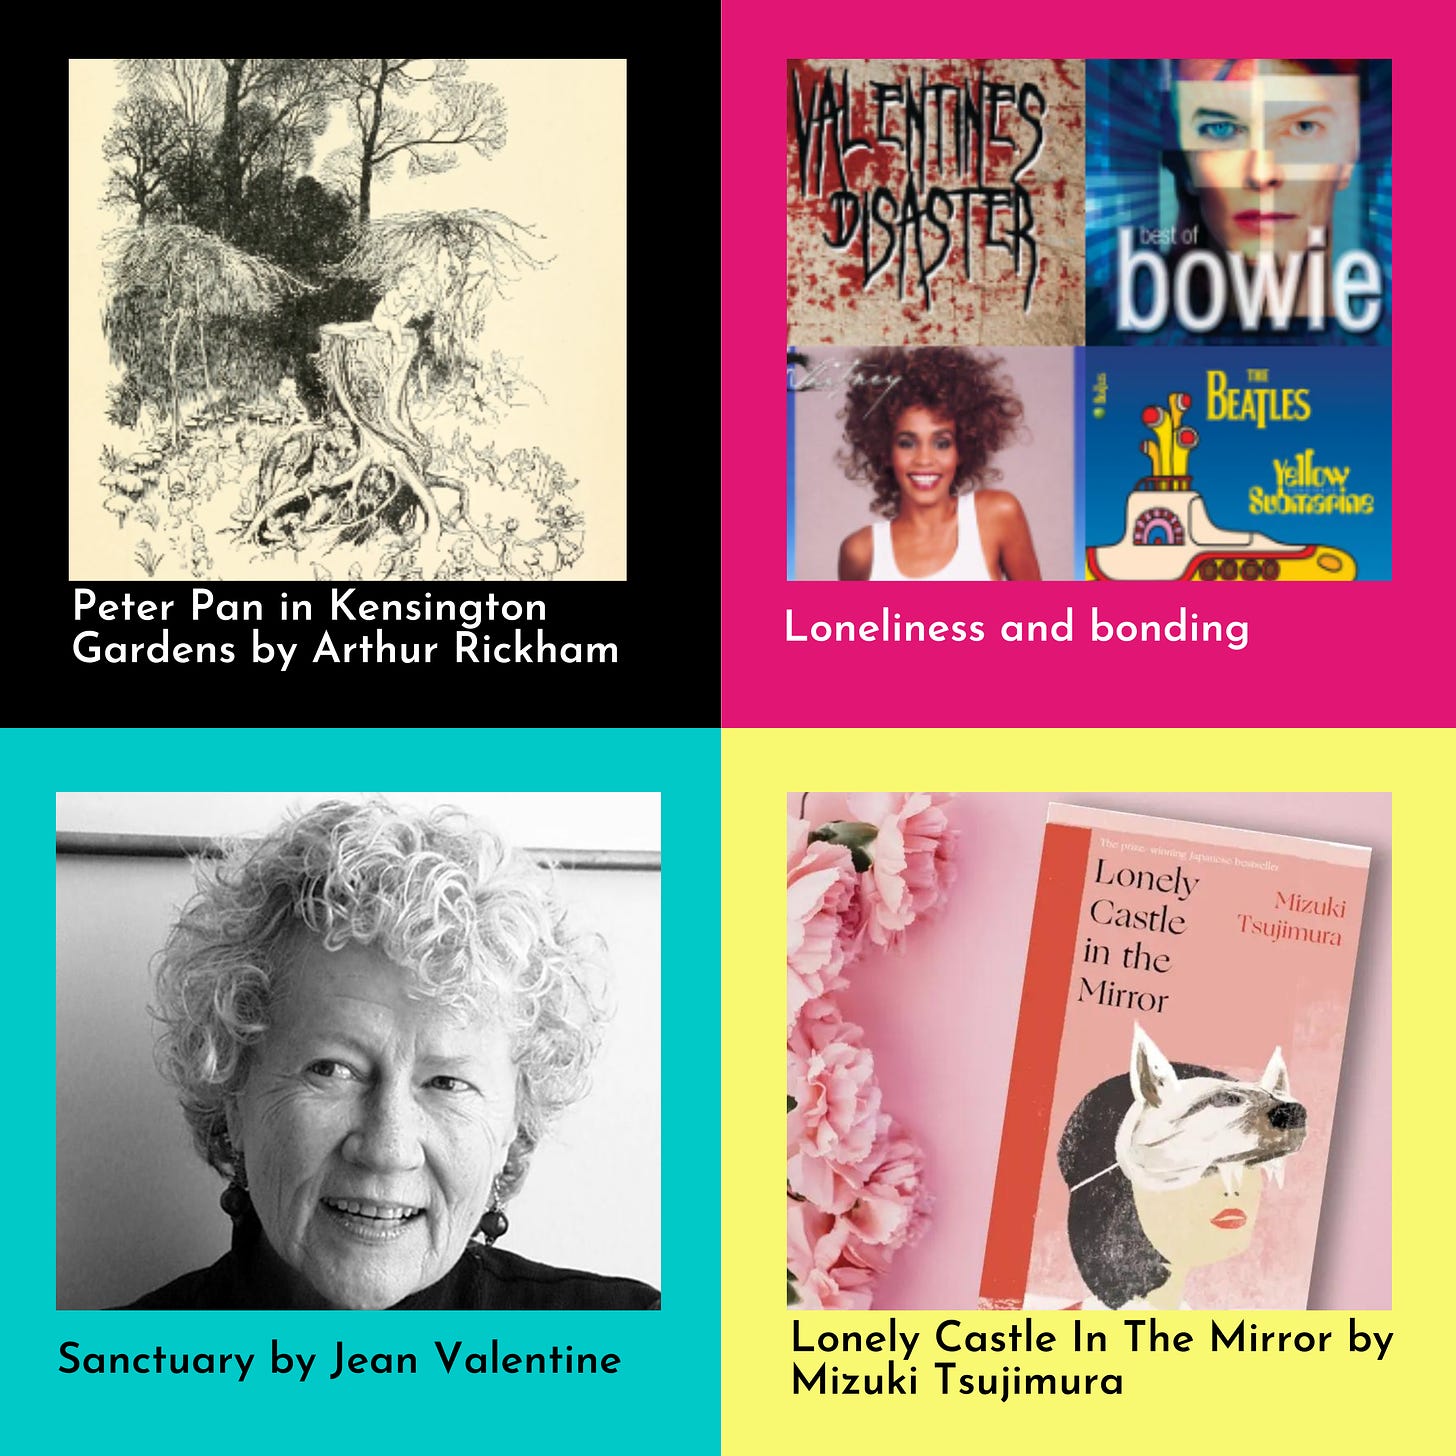 4 colour blocked tiles with recommendations including Peter Pan in Kensington gardens, a spotify playlist, an image of Jean Valentine and Lonely Castle in the Mirror, a book